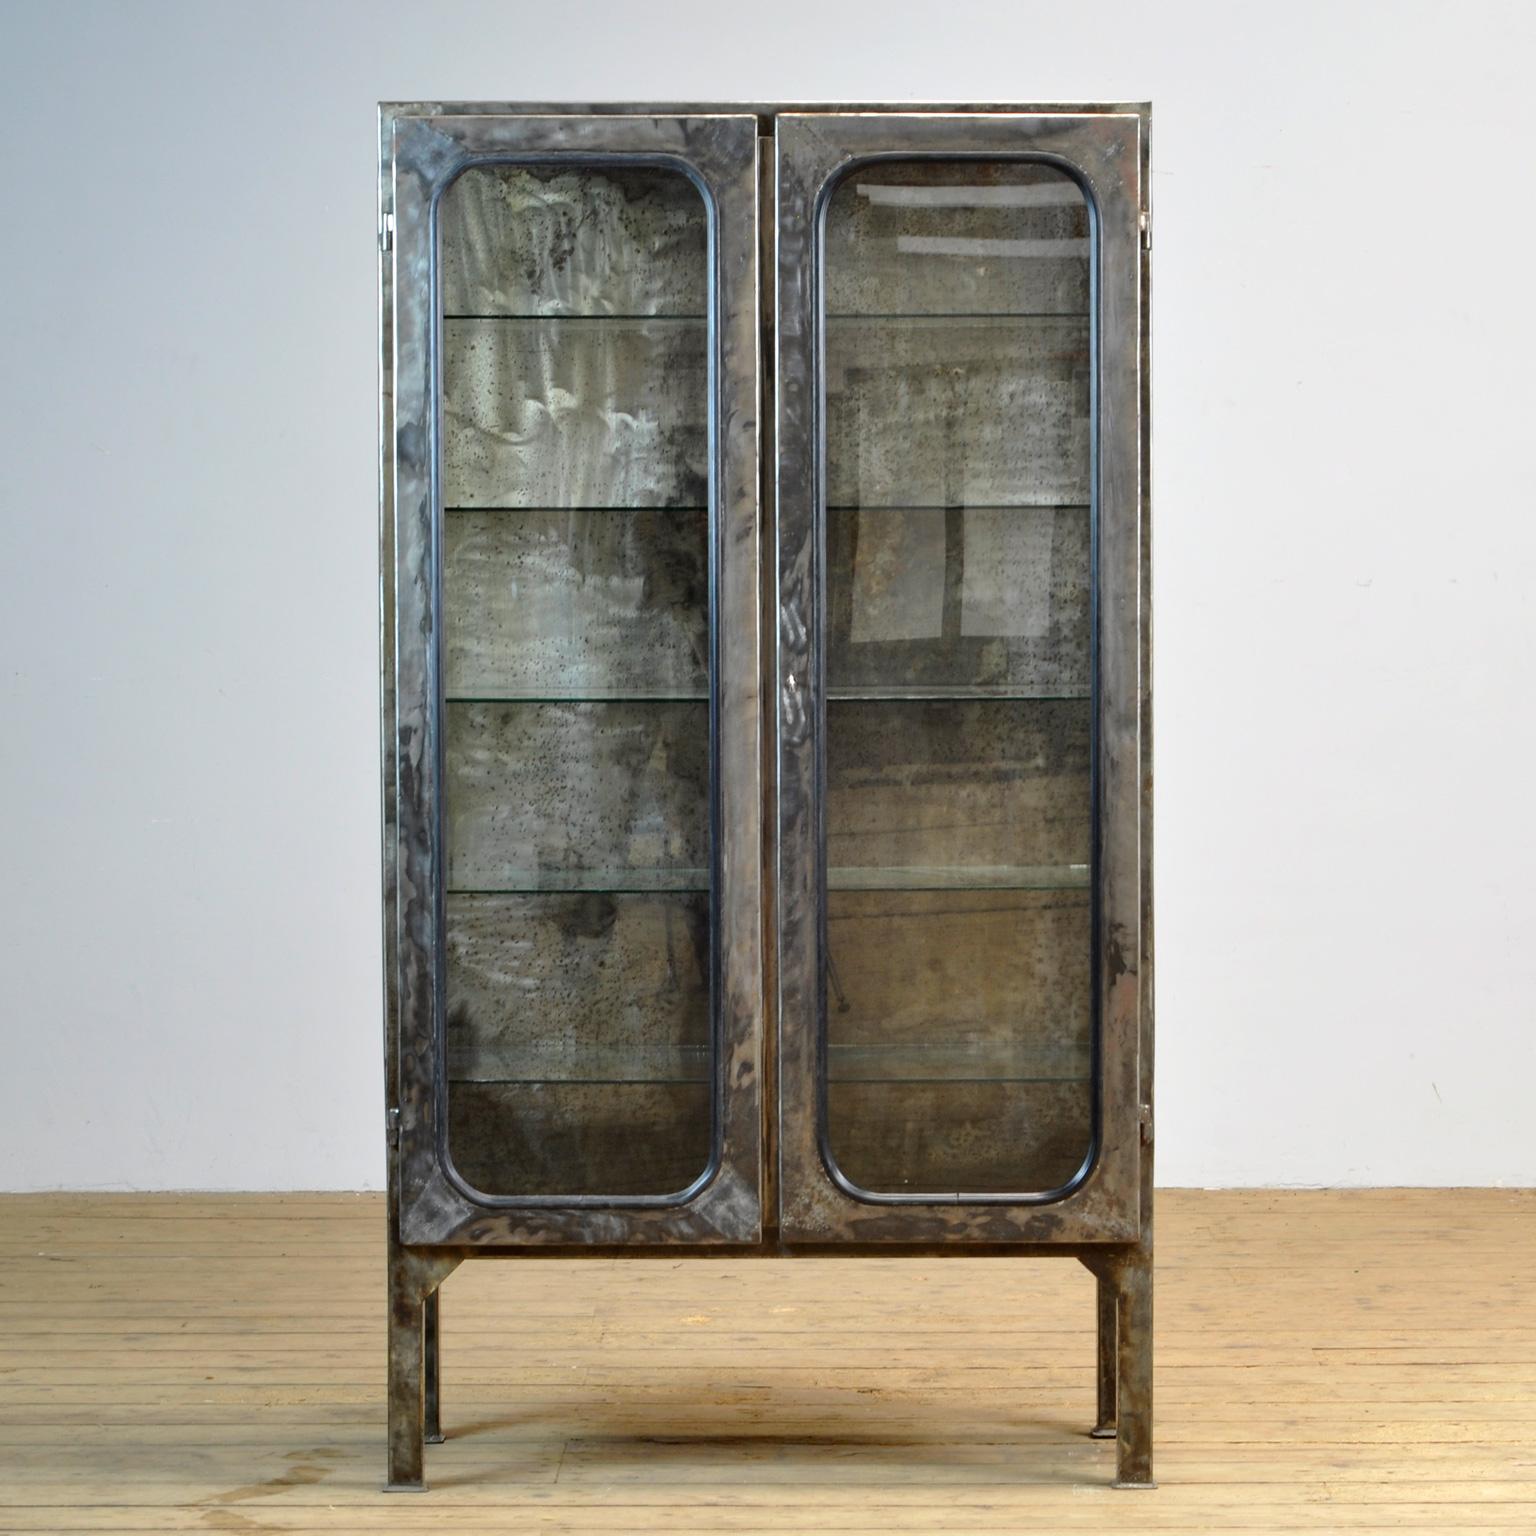 This medical cabinet was designed in the 1970s and was produced circa 1975 in hungary. It is made from iron and glass, which is held by a black rubber strip. The item has been stripped from its paint and finished with a transparant laquer. The